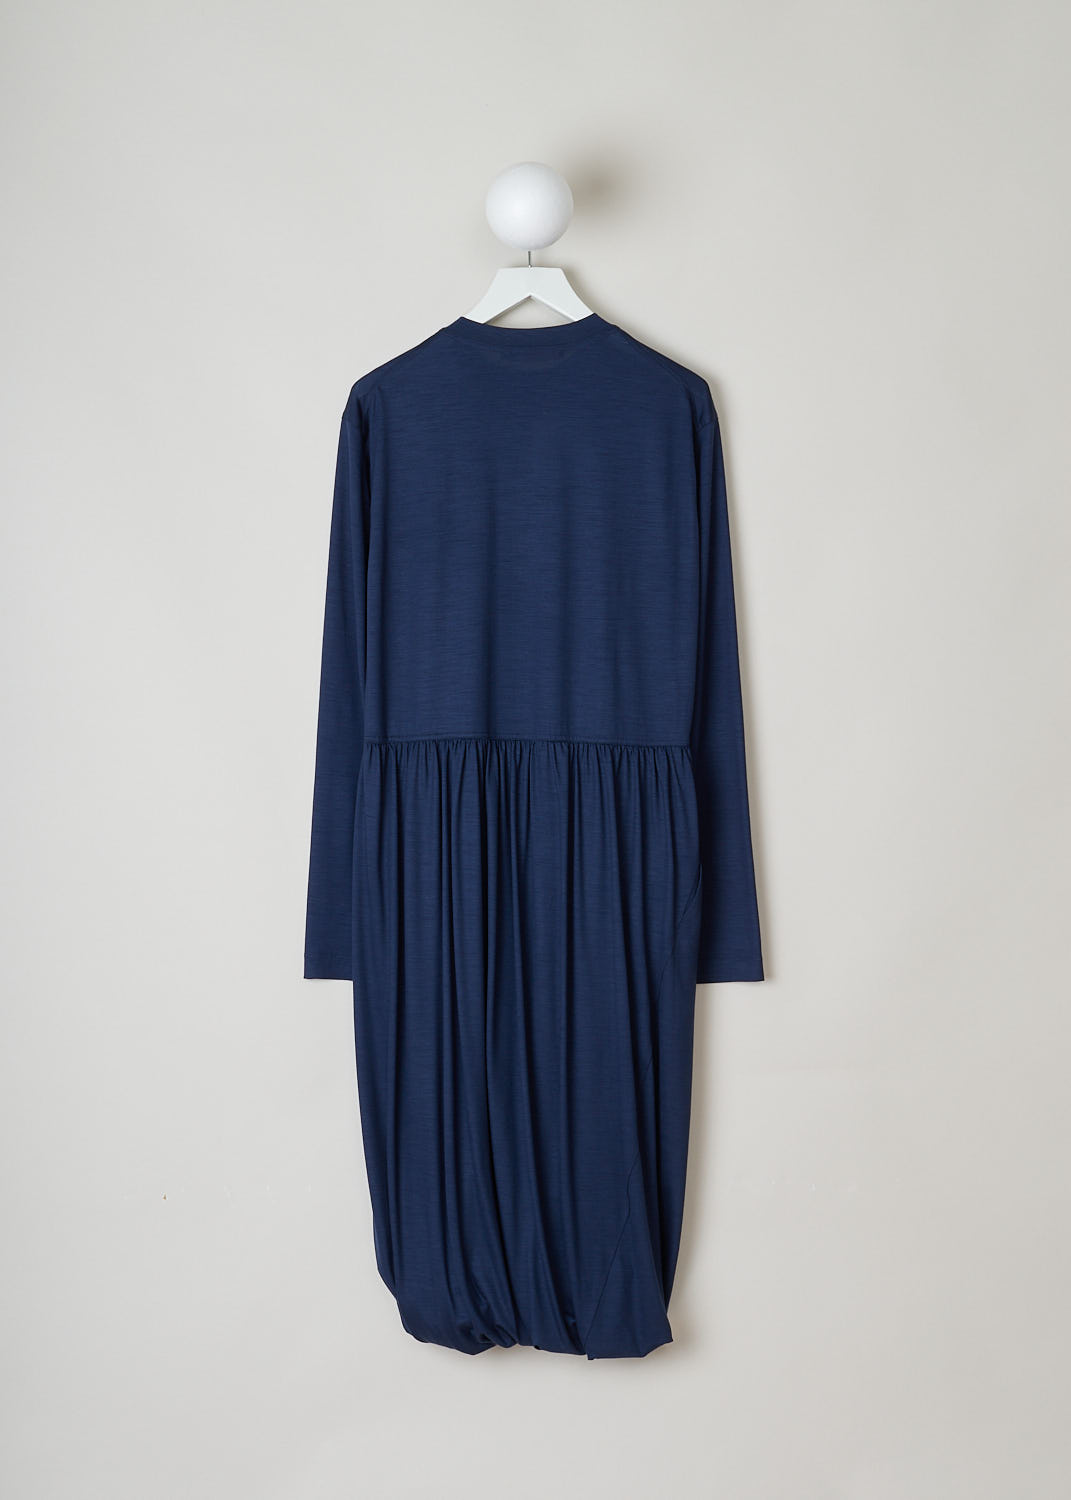 SOFIE Dâ€™HOORE, NAVY BLUE LONG SLEEVE DRESS, DEMURE_WOJE_NAVY, Blue, Back, This navy blue mid-length dress features a round neckline, a plain long sleeve bodice and a twisted balloon skirt. A single side pocket can be found concealed in the seam. 
